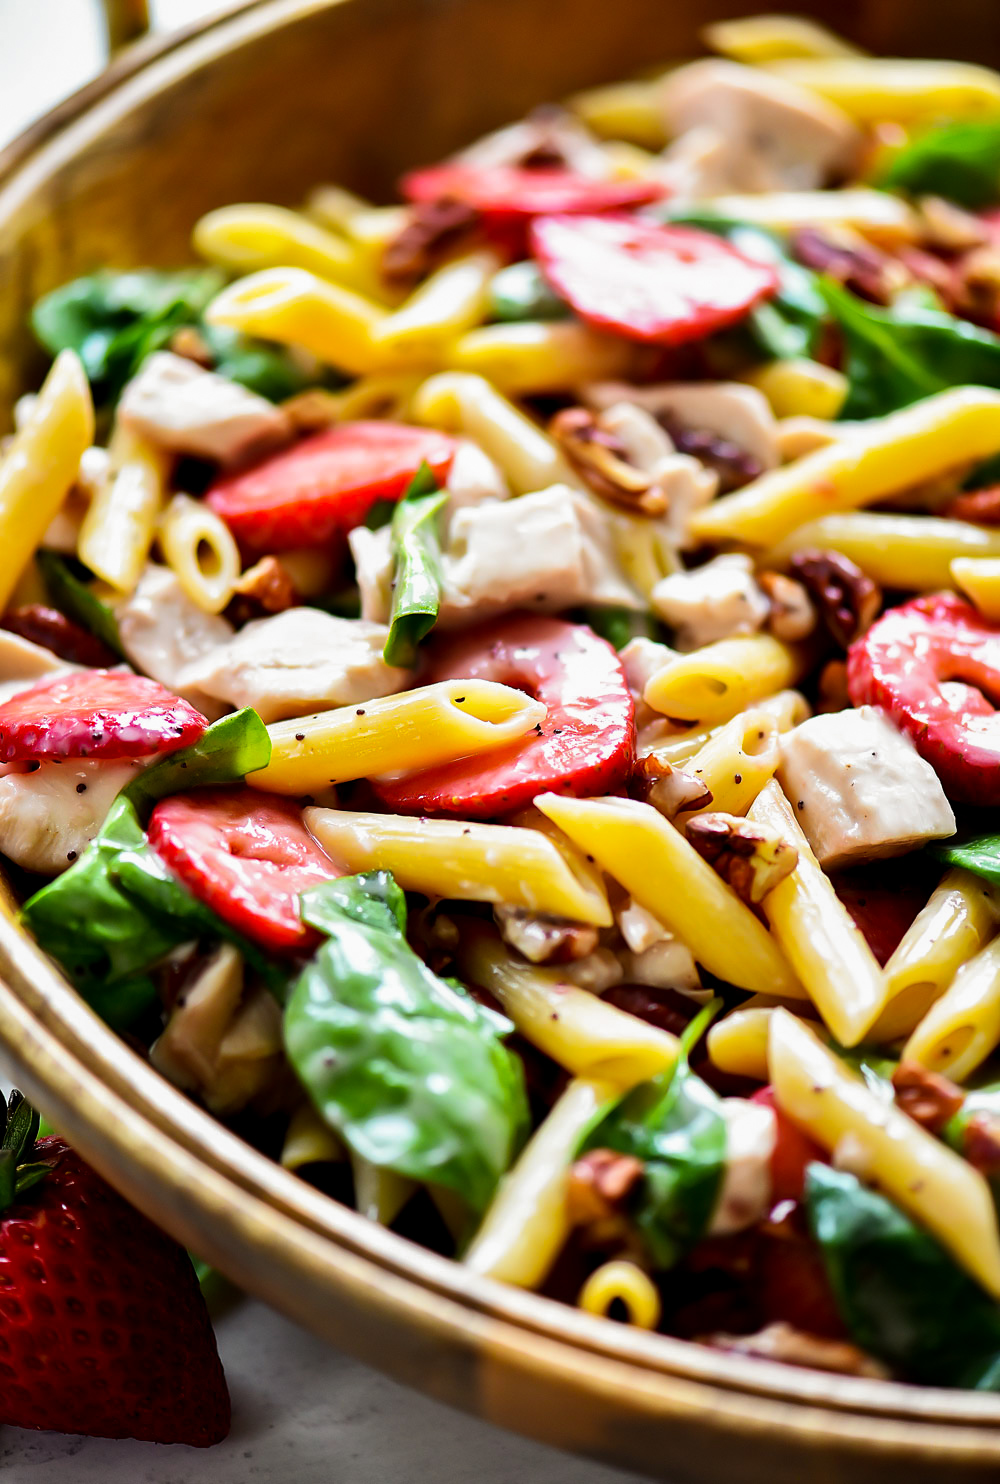 Strawberry Chicken and Spinach Pasta Salad is packed with flavor from grilled chicken, strawberries, spinach and poppy seed dressing. Life-in-the-Lofthouse.com